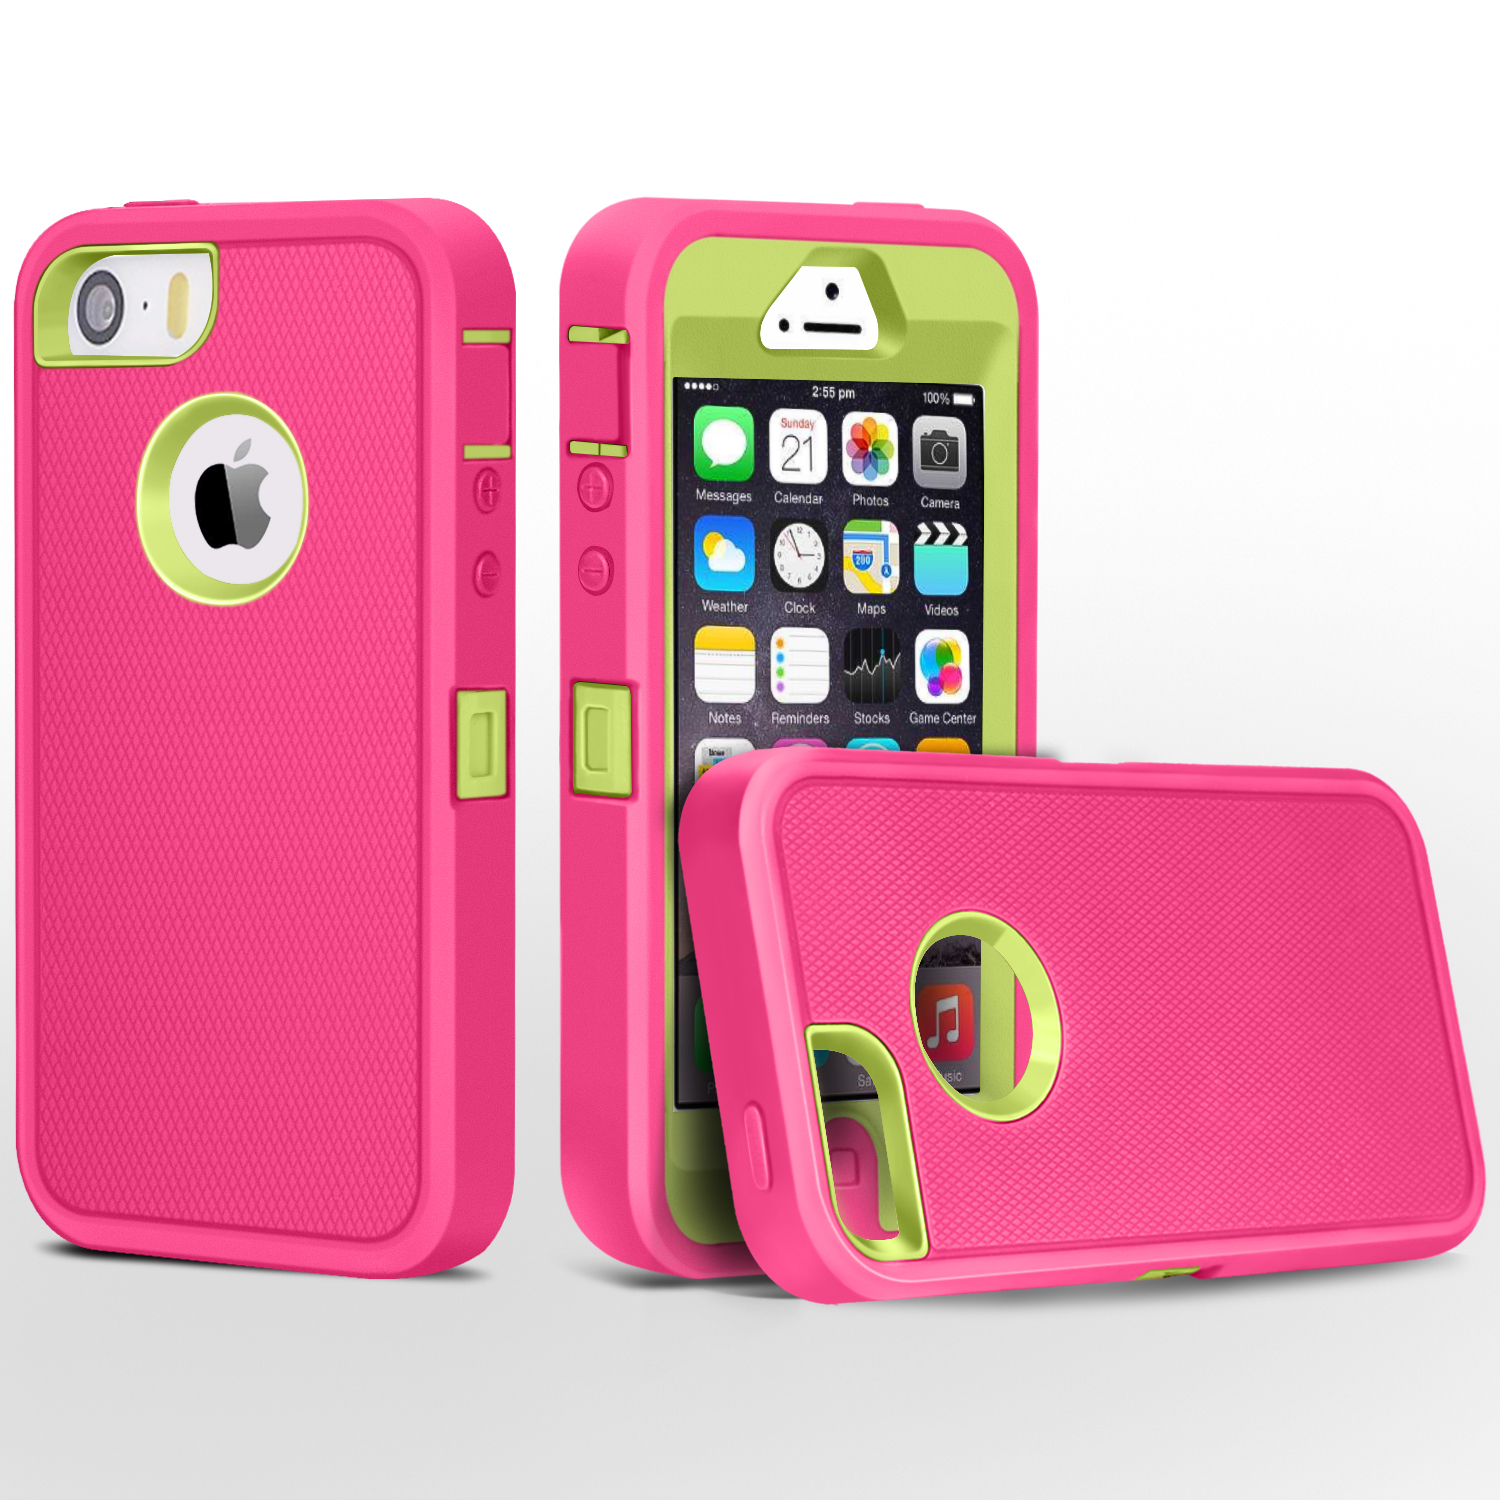 iPhone 5 Case, FogeekHeavy Duty PC + TPU Combo Protective Defender Body Armor Case for iPhone 5 & iPhone 5S(Rose/Green) …